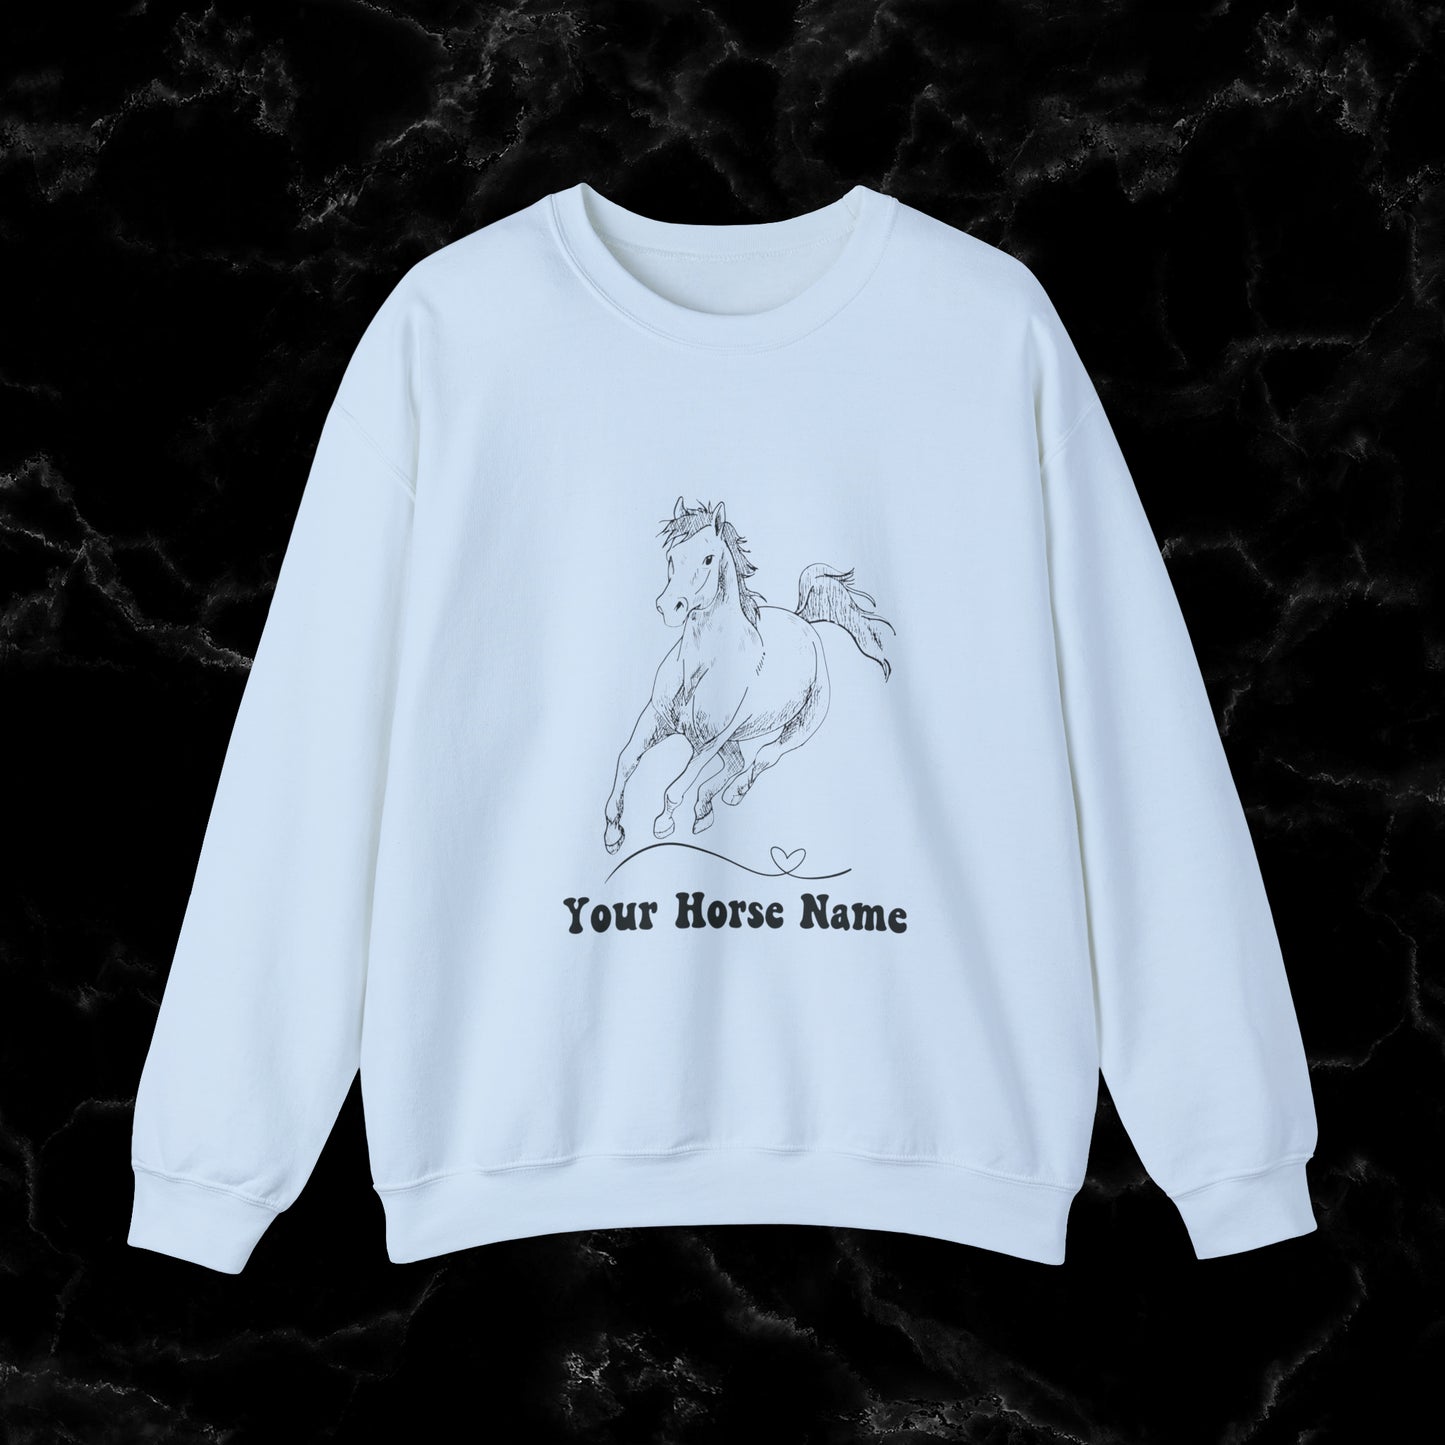 Personalized Horse Sweatshirt - Gift for Horse Owner, Perfect for Christmas, Birthdays, and Equestrian Enthusiasts - Wrap Up Warmth and Personal Connection with this Thoughtful Horse Lover's Gift Sweatshirt S Light Blue 